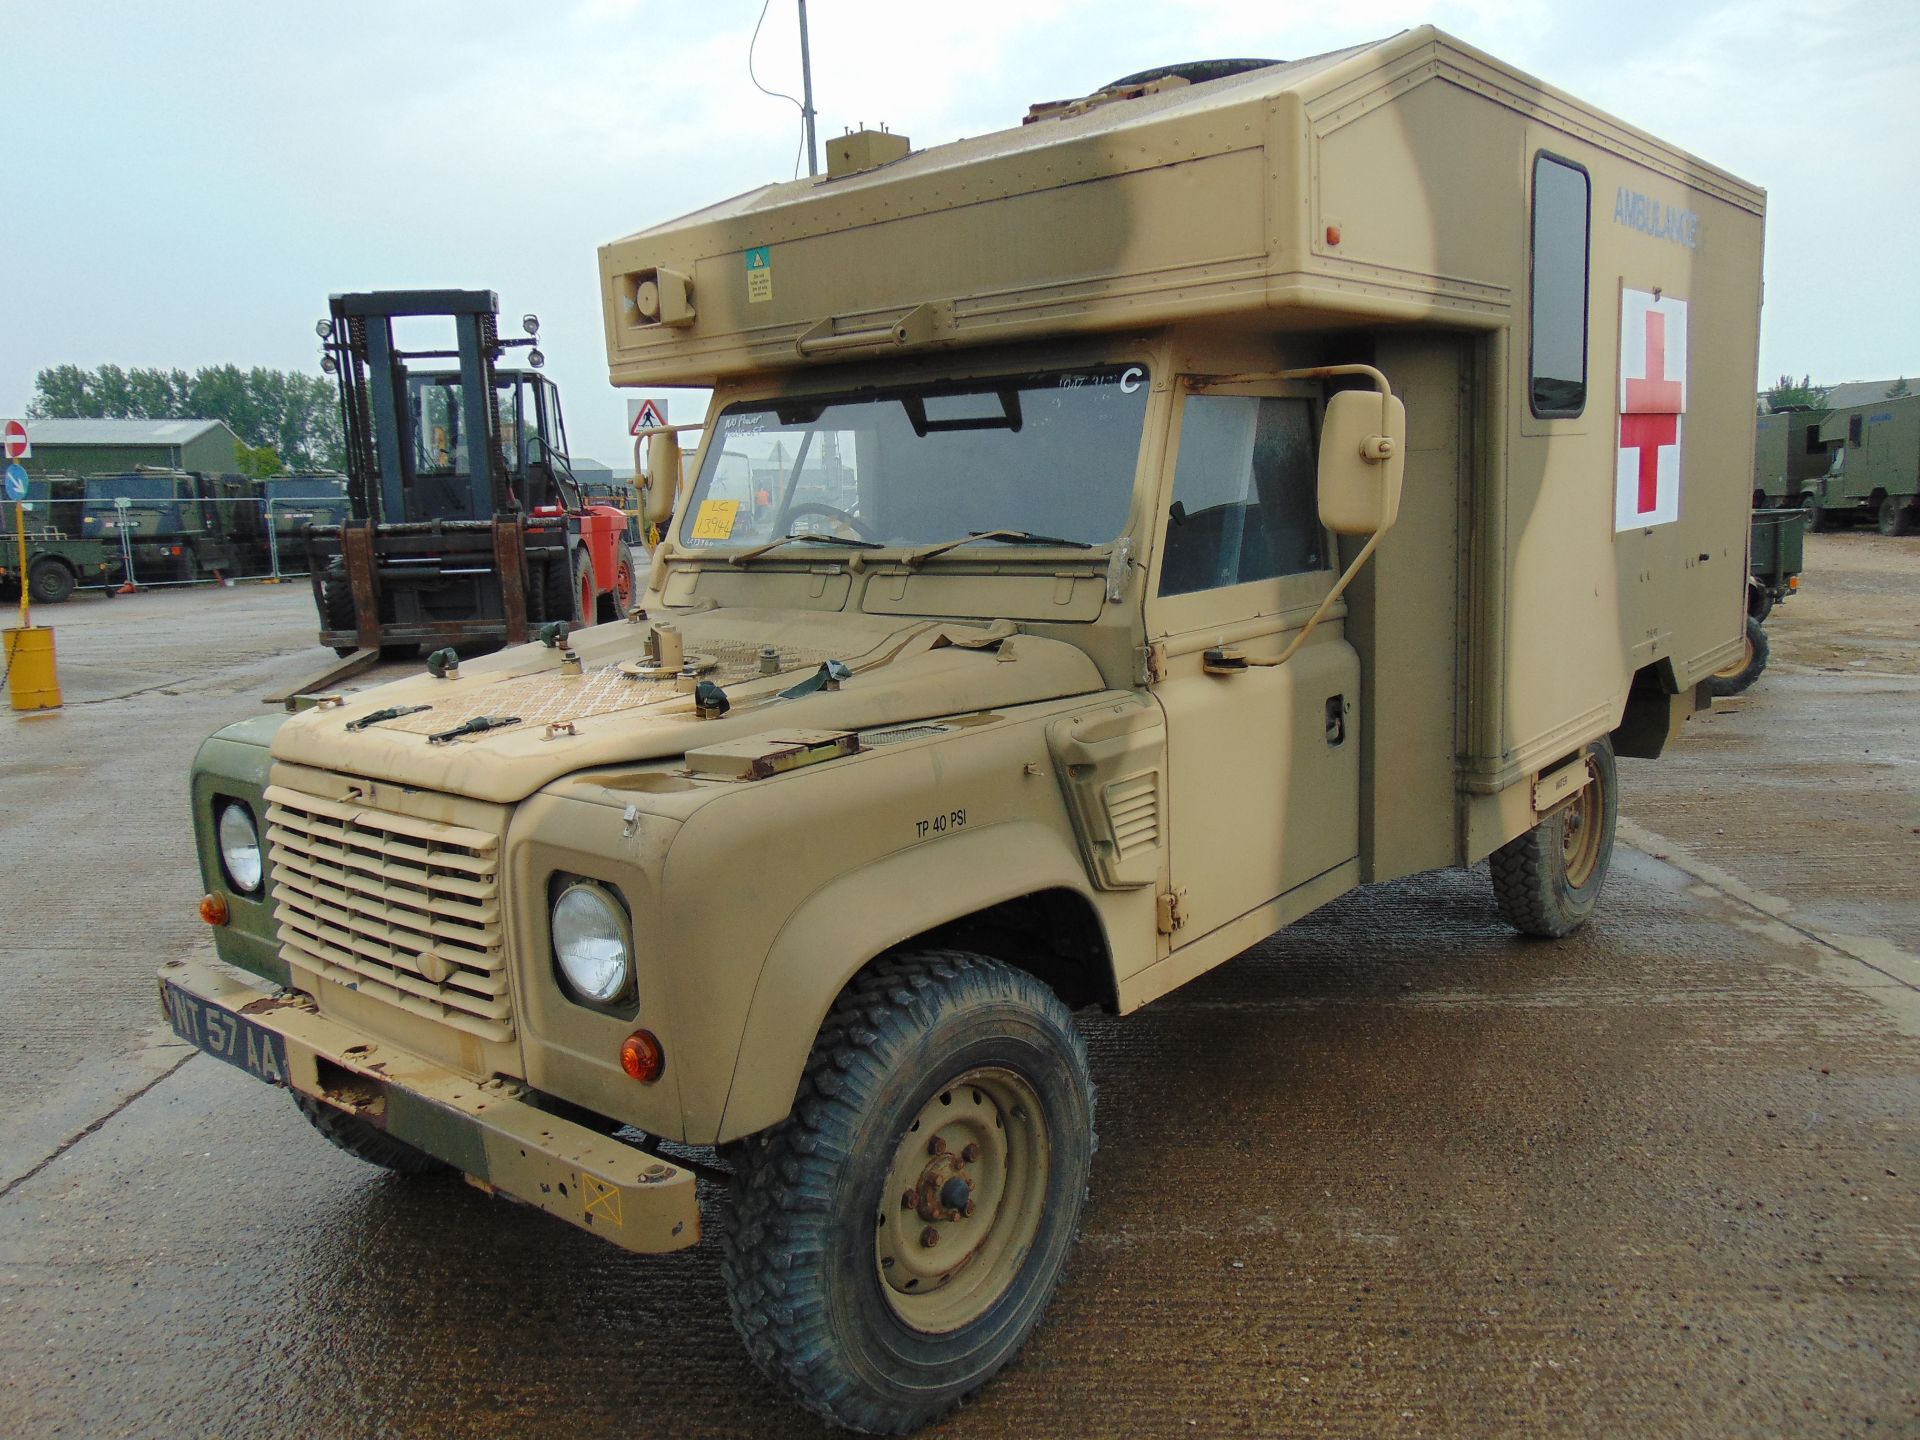 Military Specification Land Rover Wolf 130 ambulance - Image 3 of 21